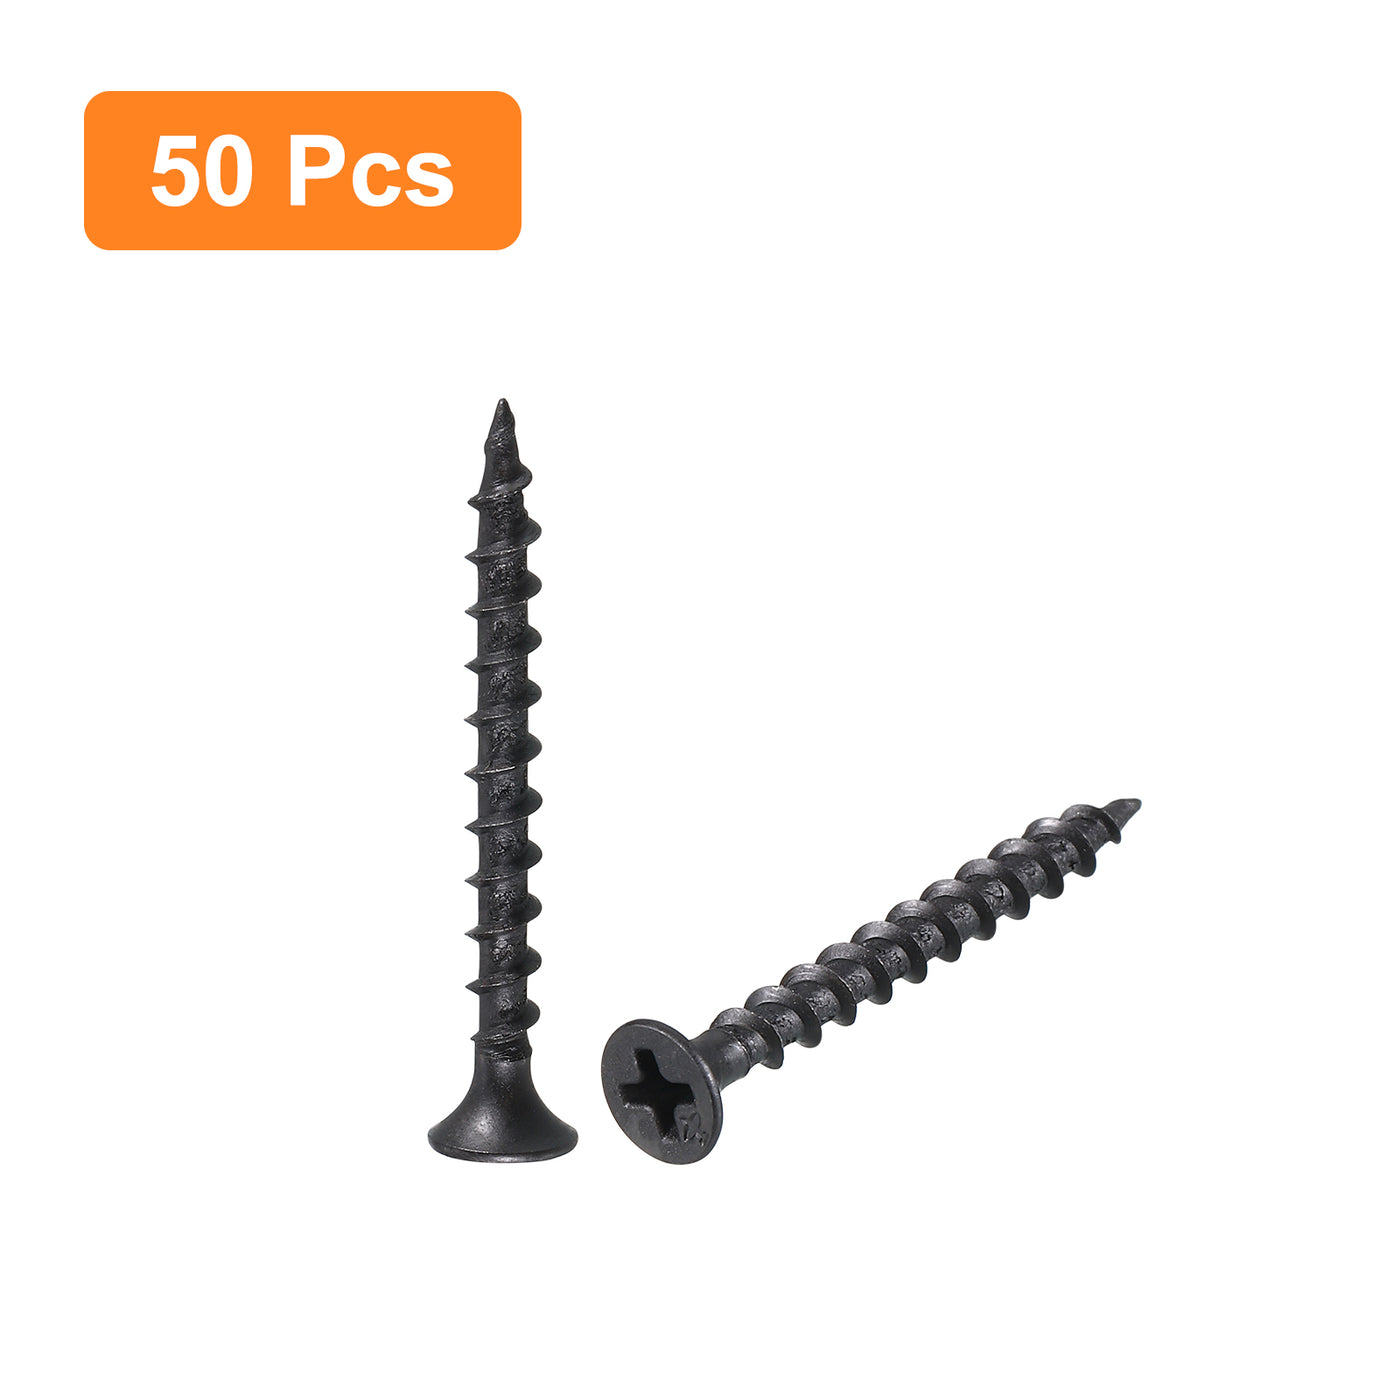 uxcell Uxcell M3.8x40mm 50pcs Phillips Drive Wood Screws, Carbon Steel Self Tapping Screws